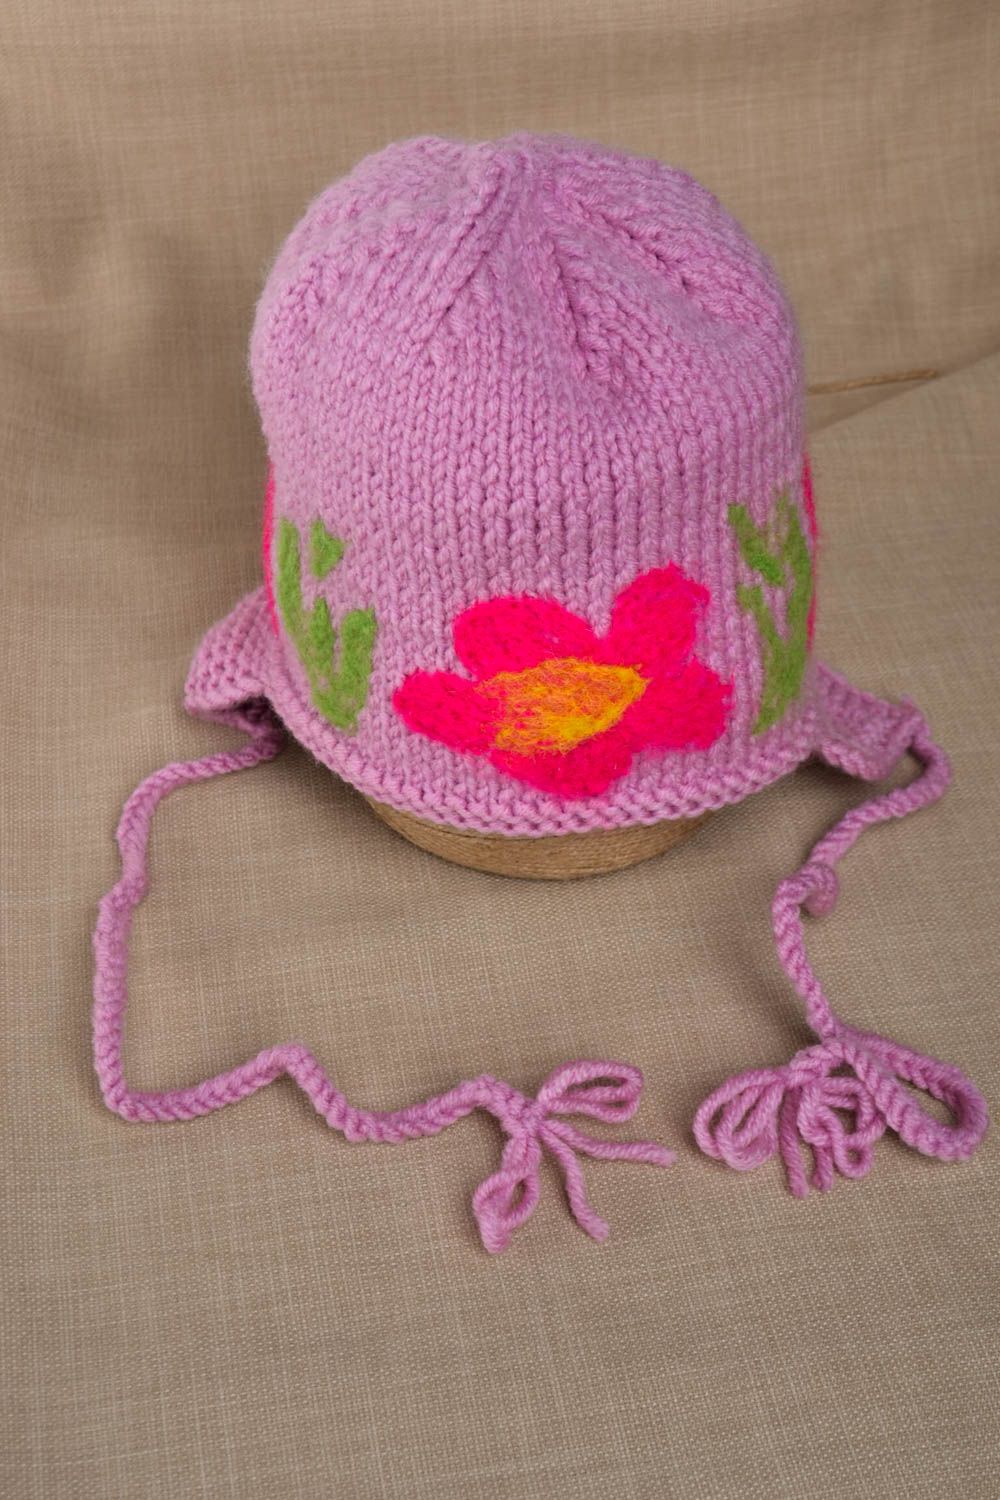 Handmade warm knitted hat soft autumn hat for kids baby har design gifts for her photo 1